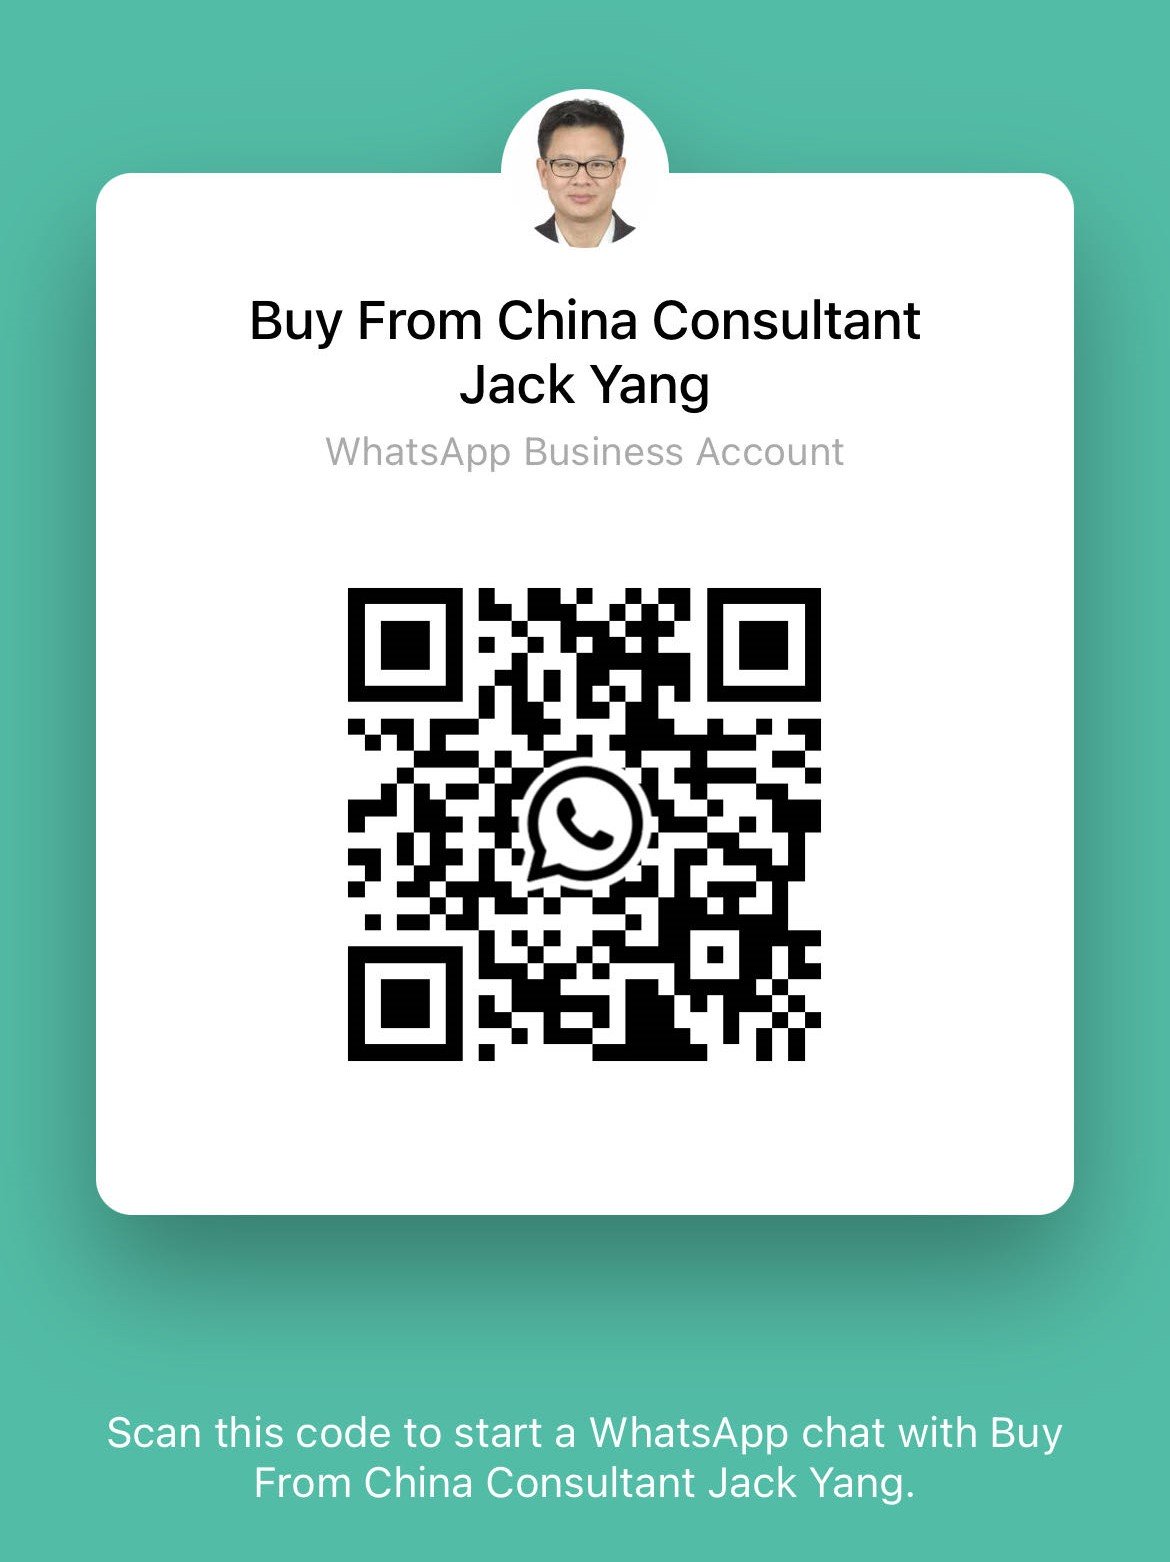 Buy_from_China_Consultant_Jack_Yang_QR_code_1